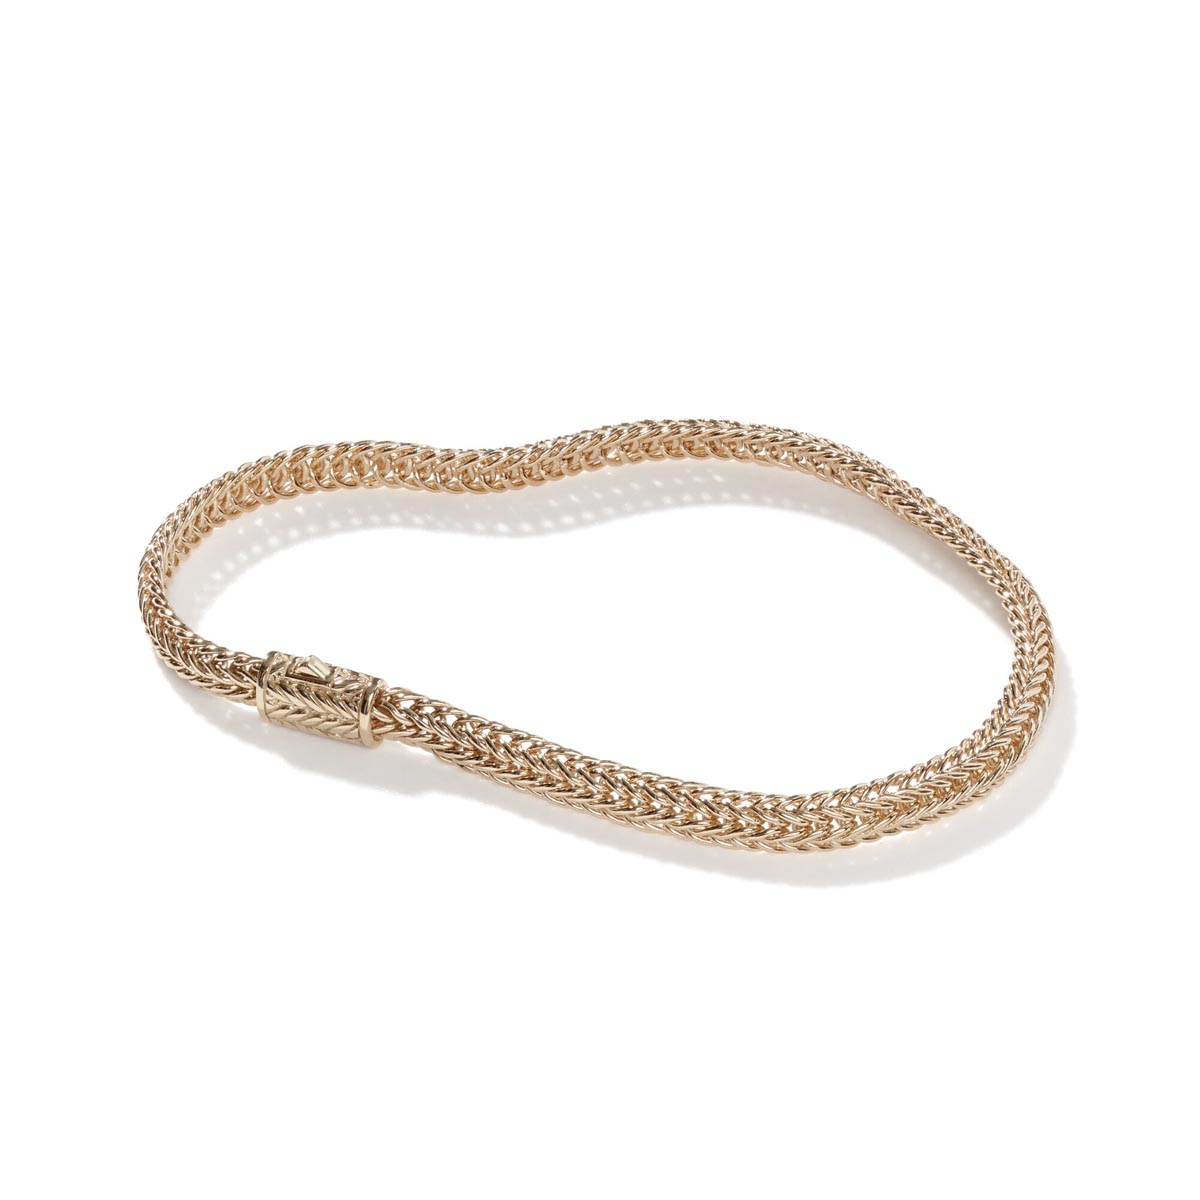 John Hardy Classic Chain Collection Kami Bracelet in 14kt Yellow Gold